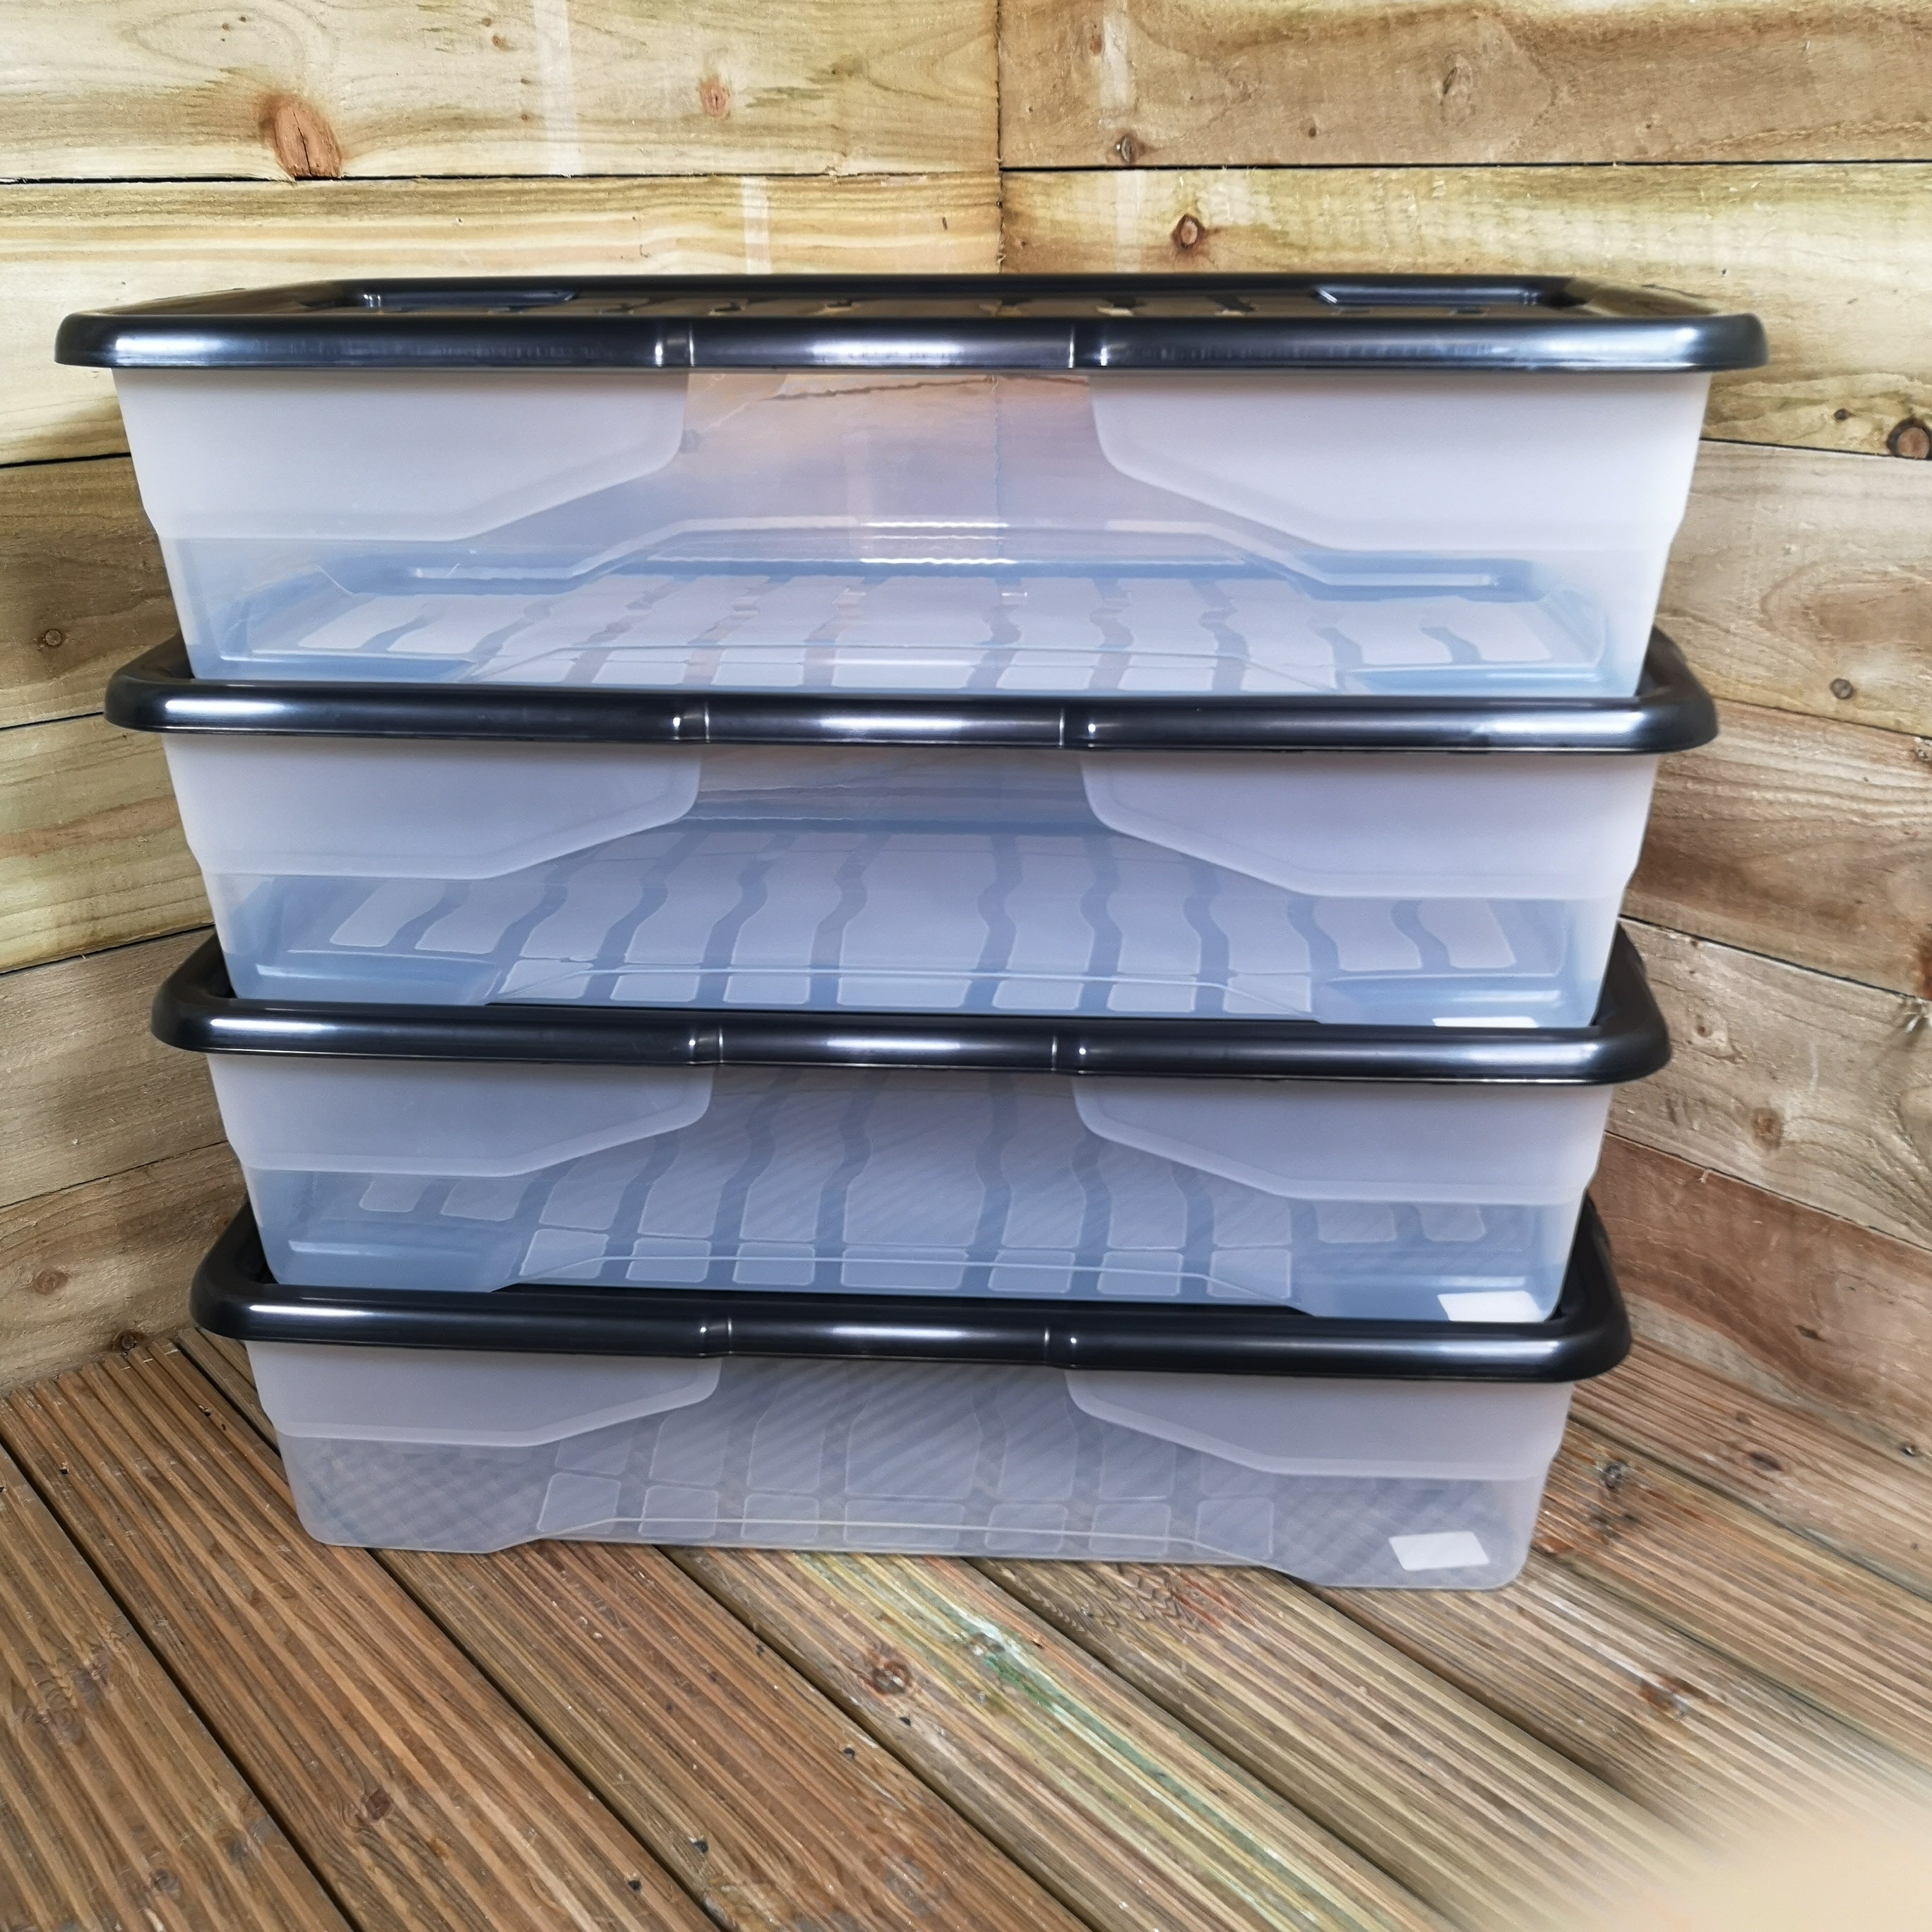 4 x 42L Clear Under Bed Storage Box with Black Lid, Stackable and Nestable Design Storage Solution